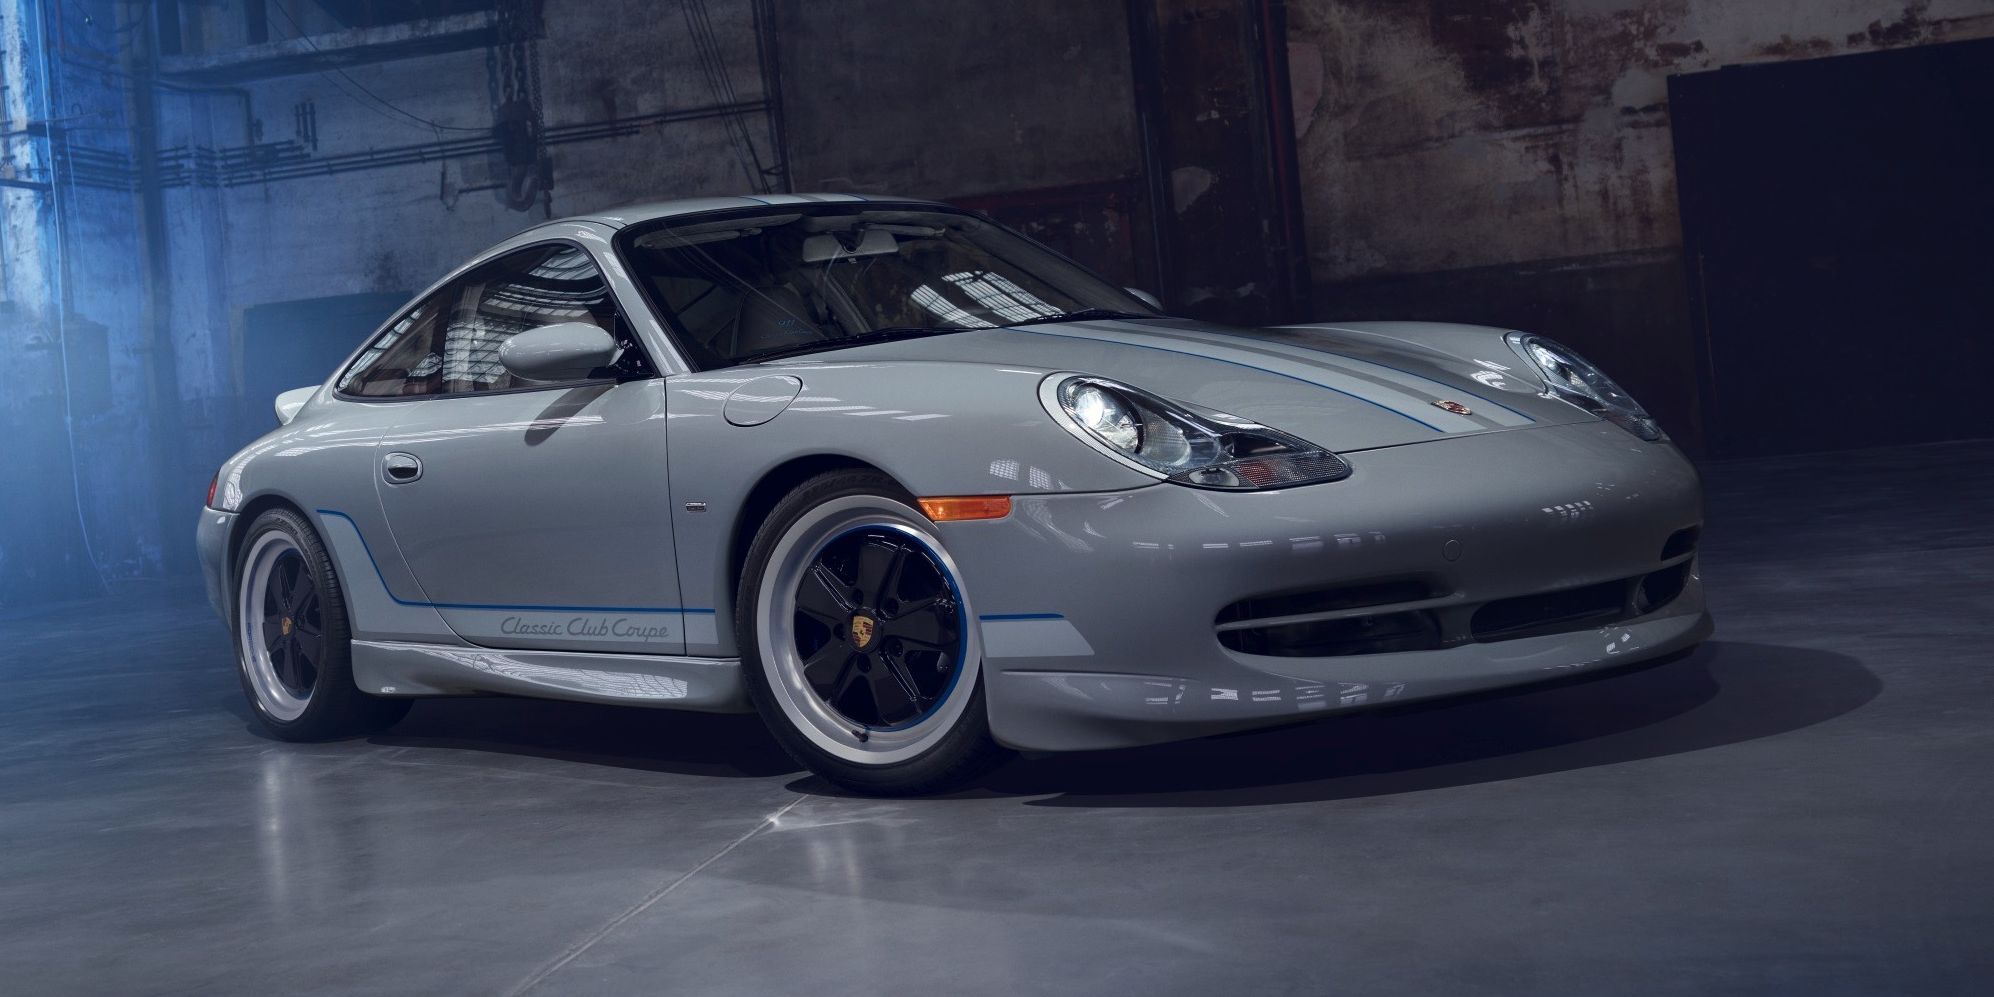 You Can Buy the One-Off GT3-Powered Porsche 996 Classic Club Coupe